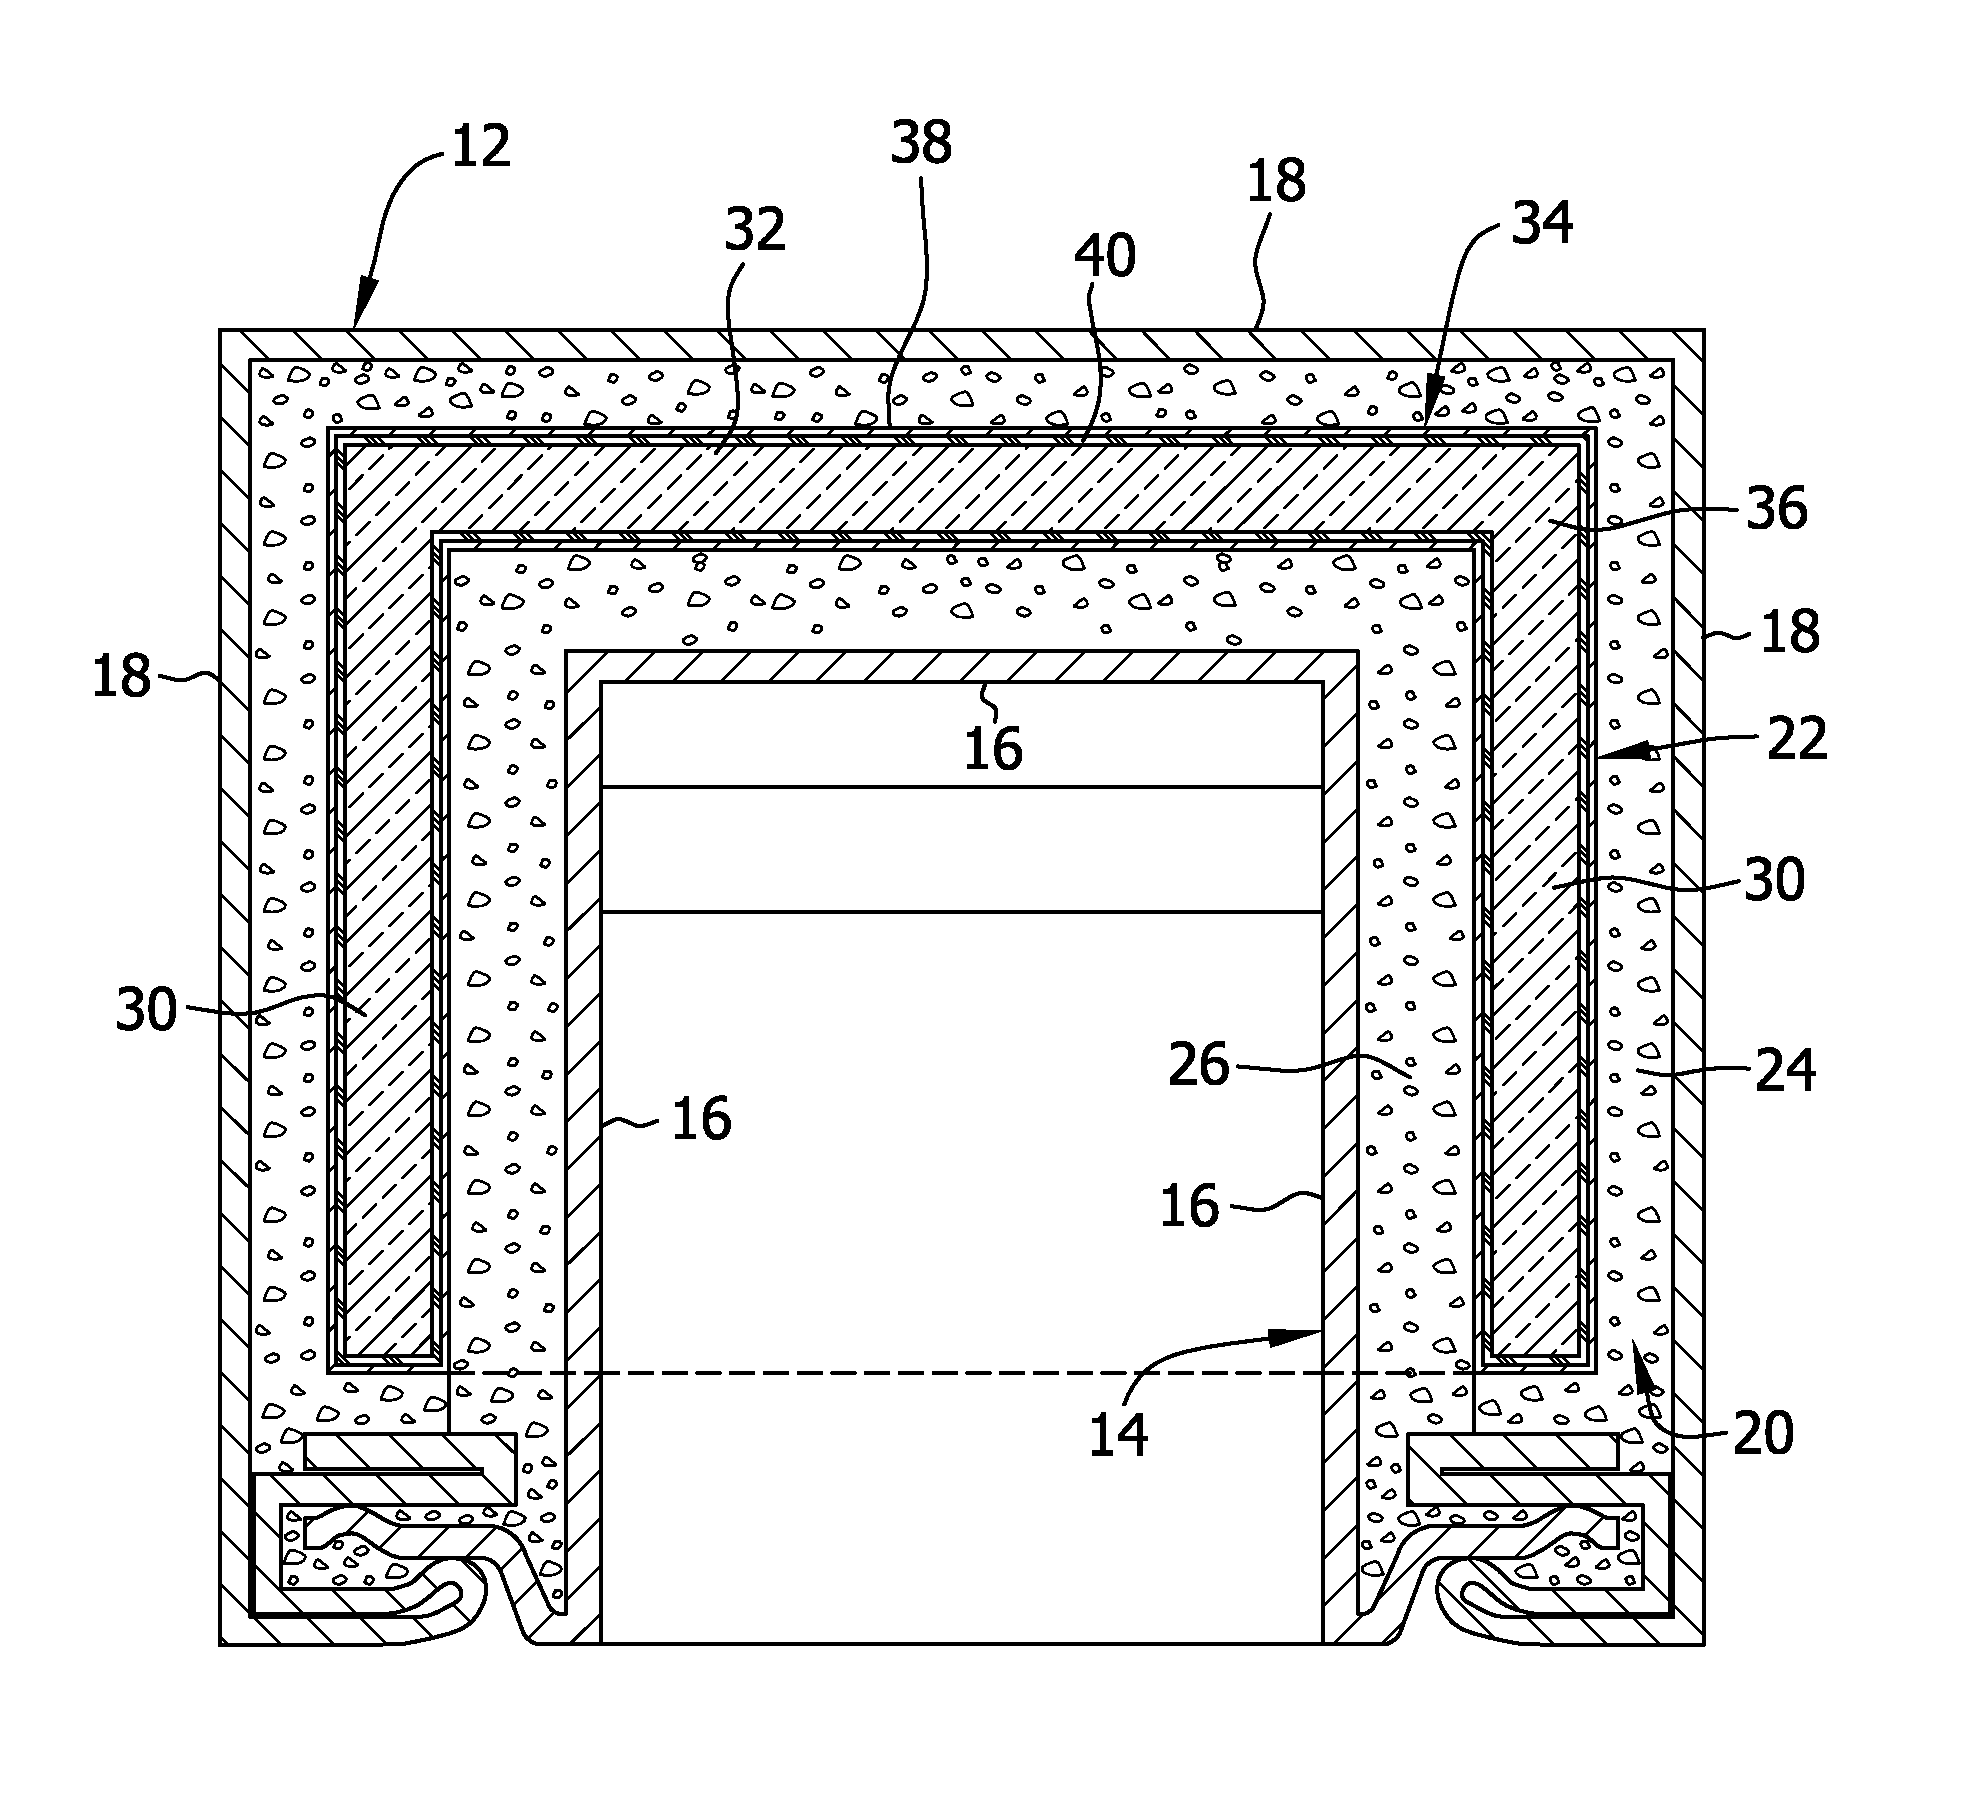 Method and apparatus for insulating a refrigeration appliance